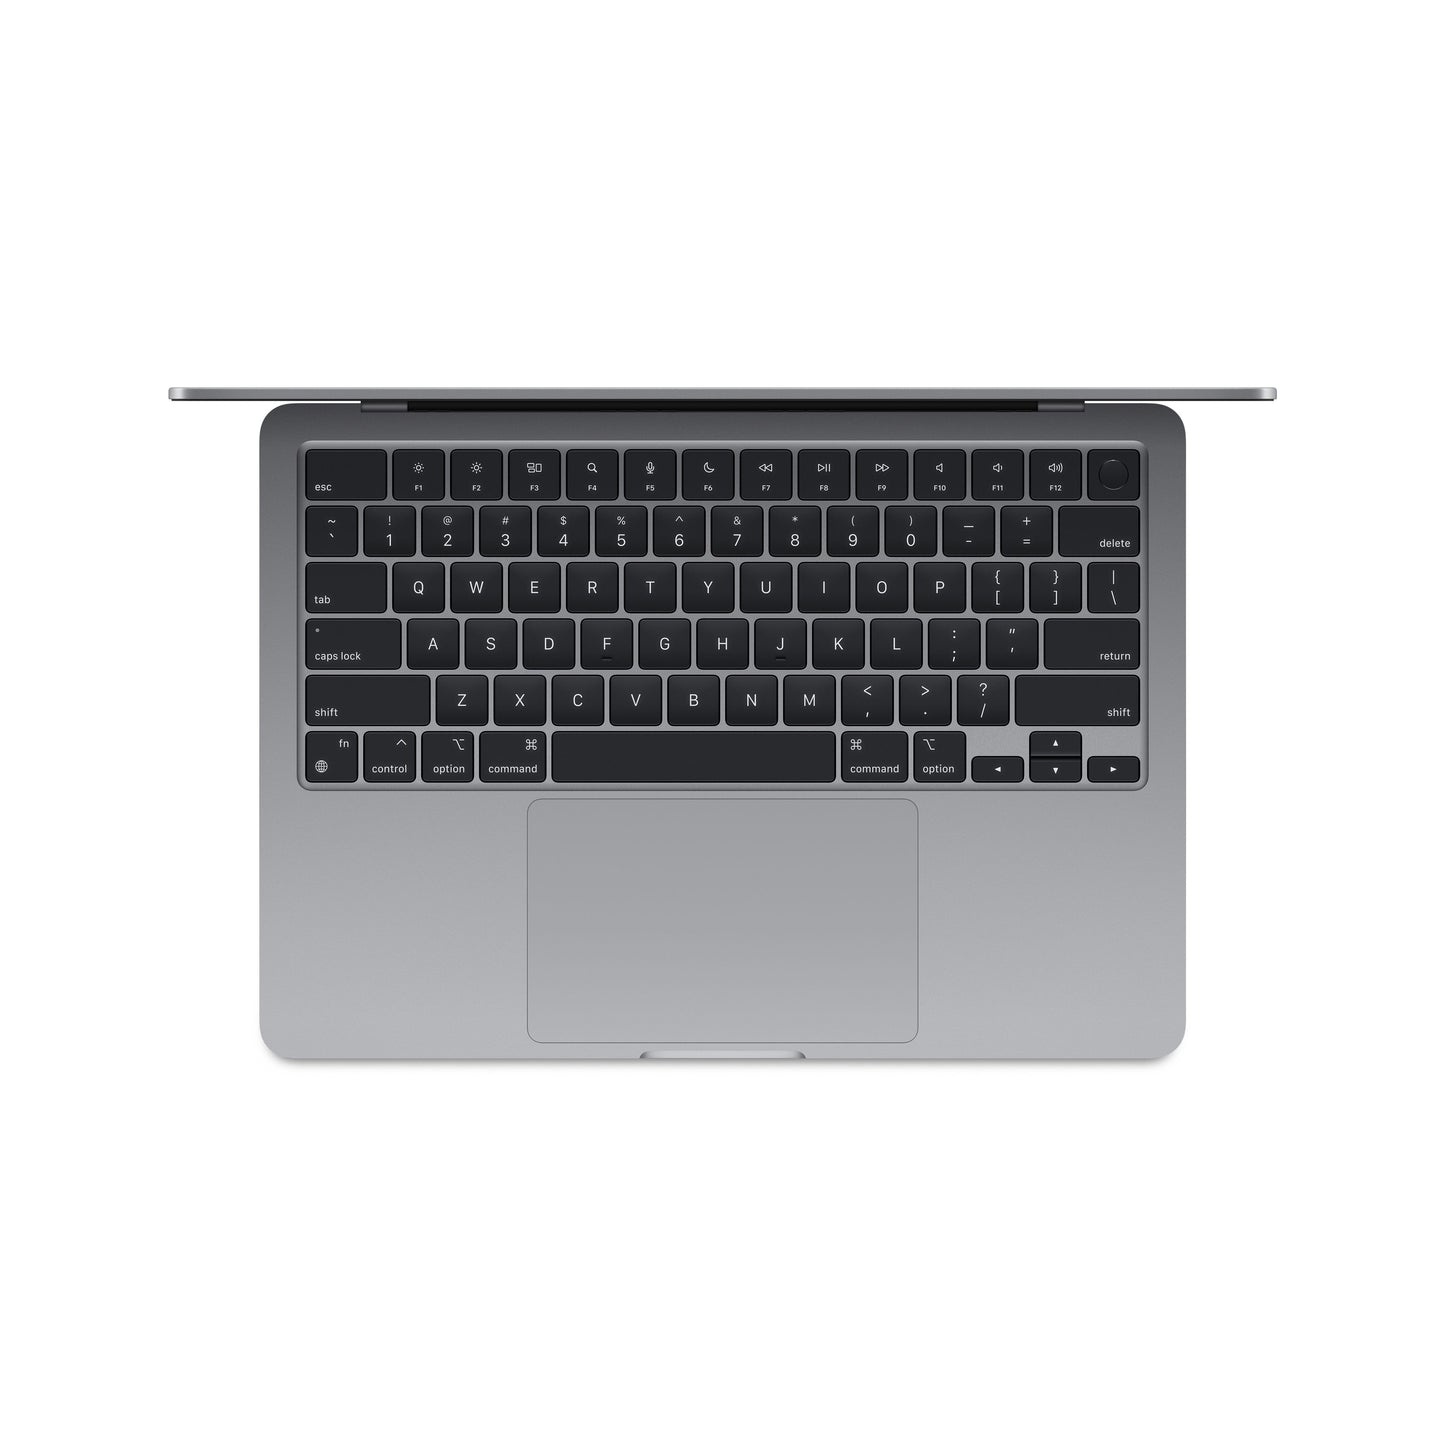 13-inch MacBook Air: Apple M3 chip with 8‑core CPU and 10‑core GPU, 512GB SSD - Space Gray